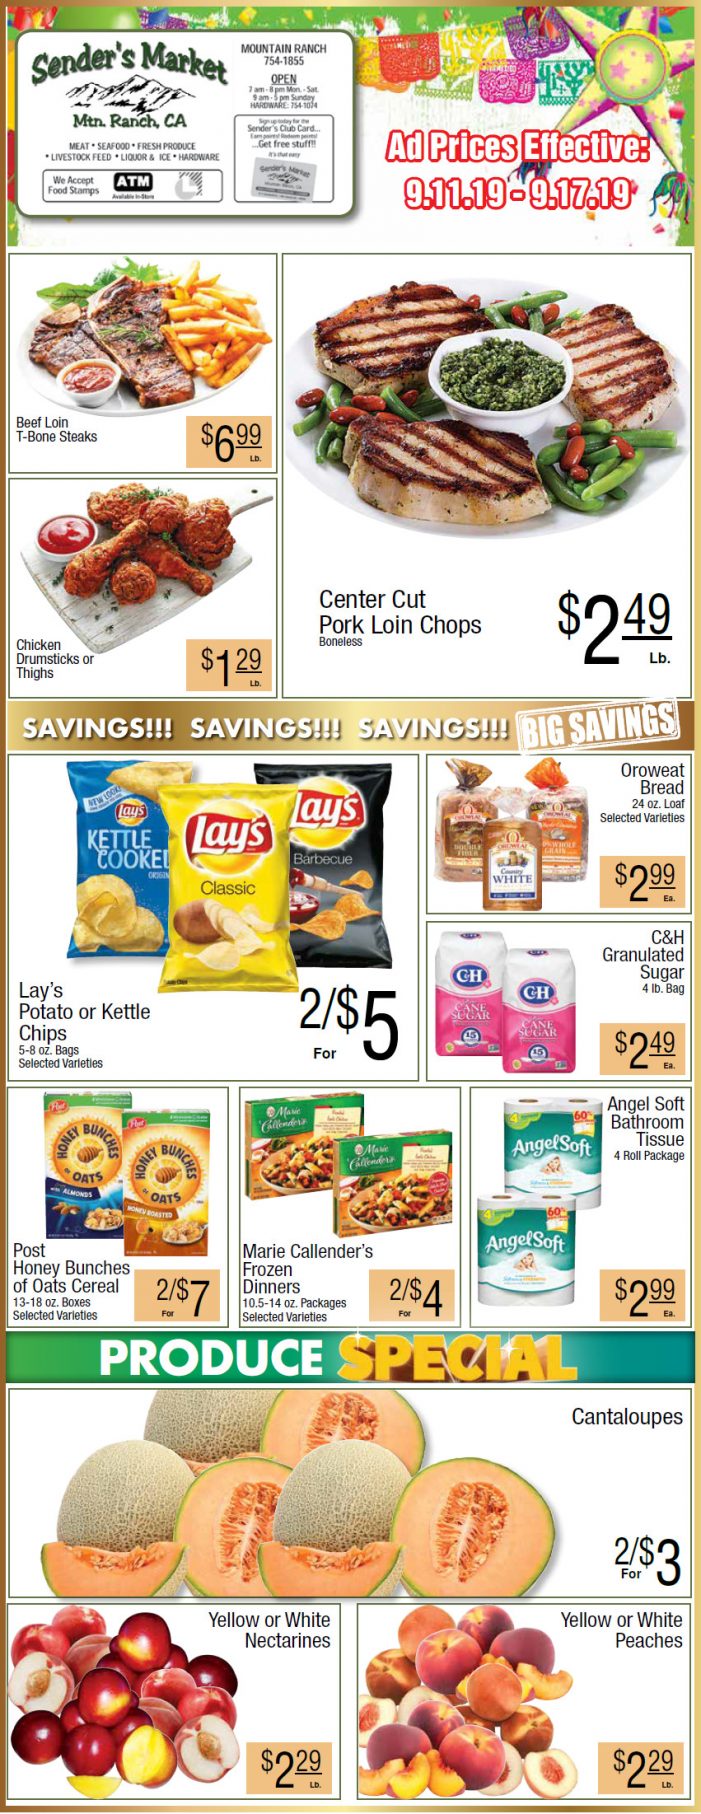 Sender’s Market Weekly Ad & Grocery Specials Through September 17th